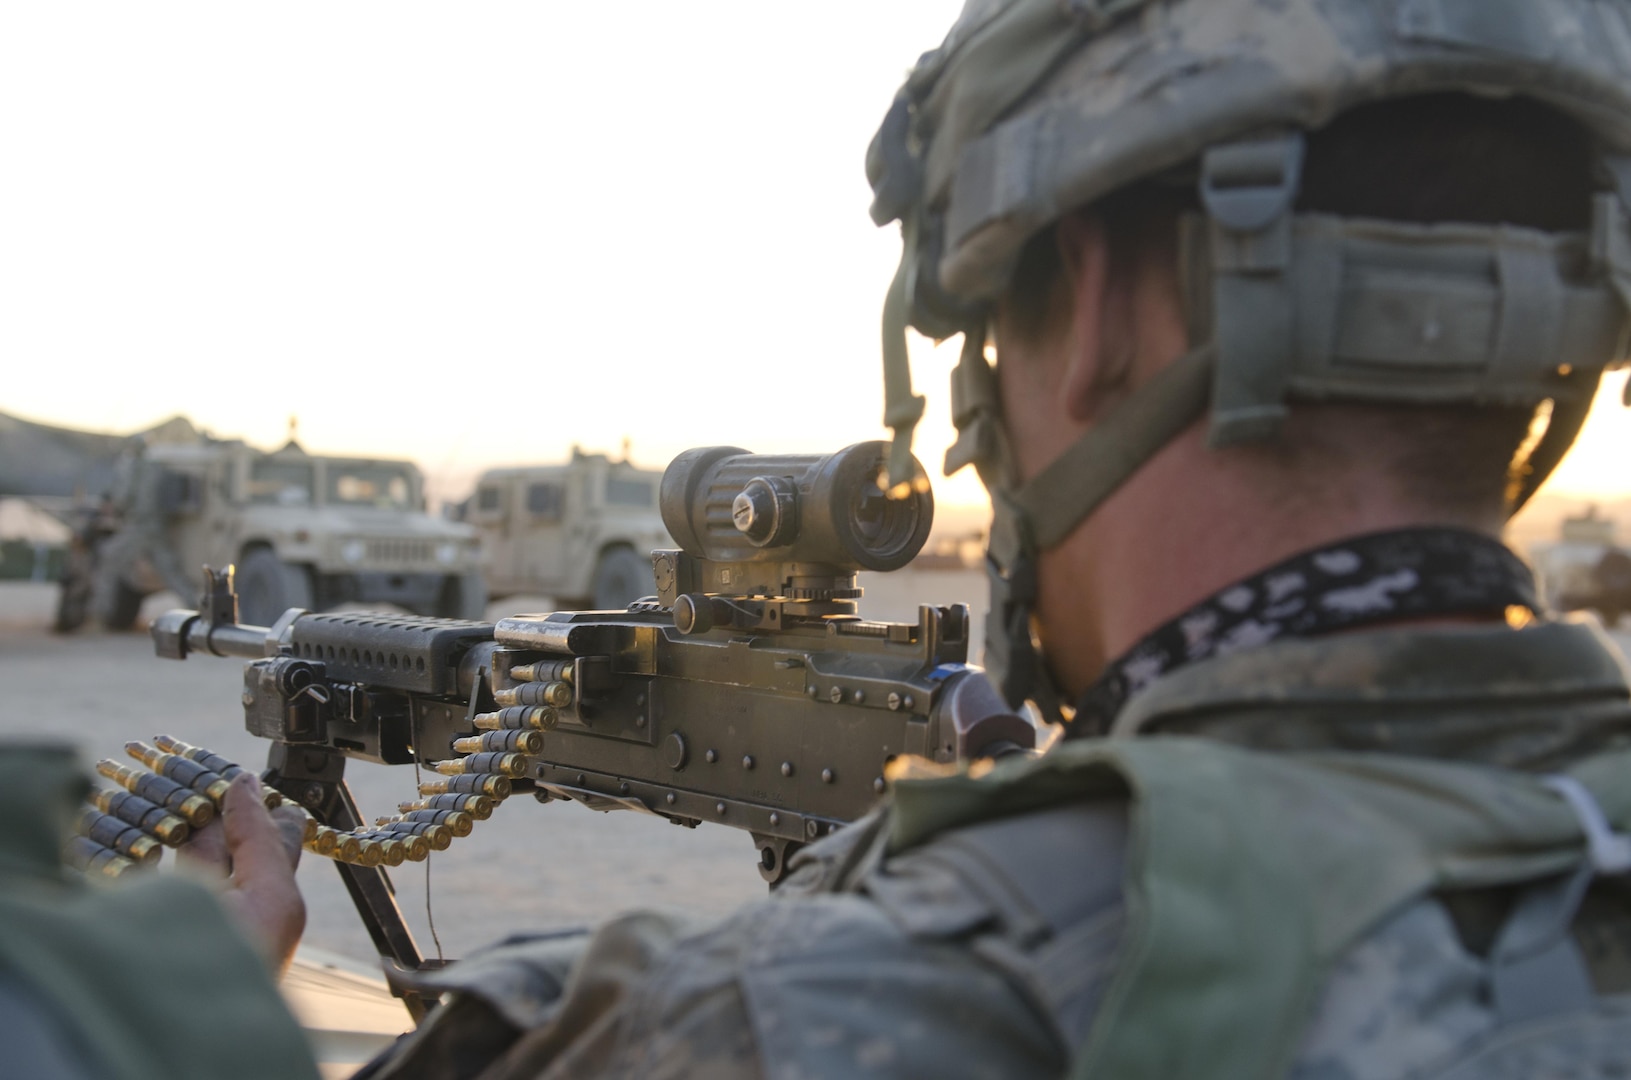 A Soldier assigned to 1-2 Stryker Brigade Combat Team prepares to fire back at enemy soldiers during Decisive Action Training Rotation 16-06 at the National Training Center in Fort Irwin, Calif., May 16, 2016. The training focused on the 1-2 SBCT combating a near-peer enemy and smaller militant groups in a foreign country. (U.S. Army Photo by Maj. Kelly Haux)